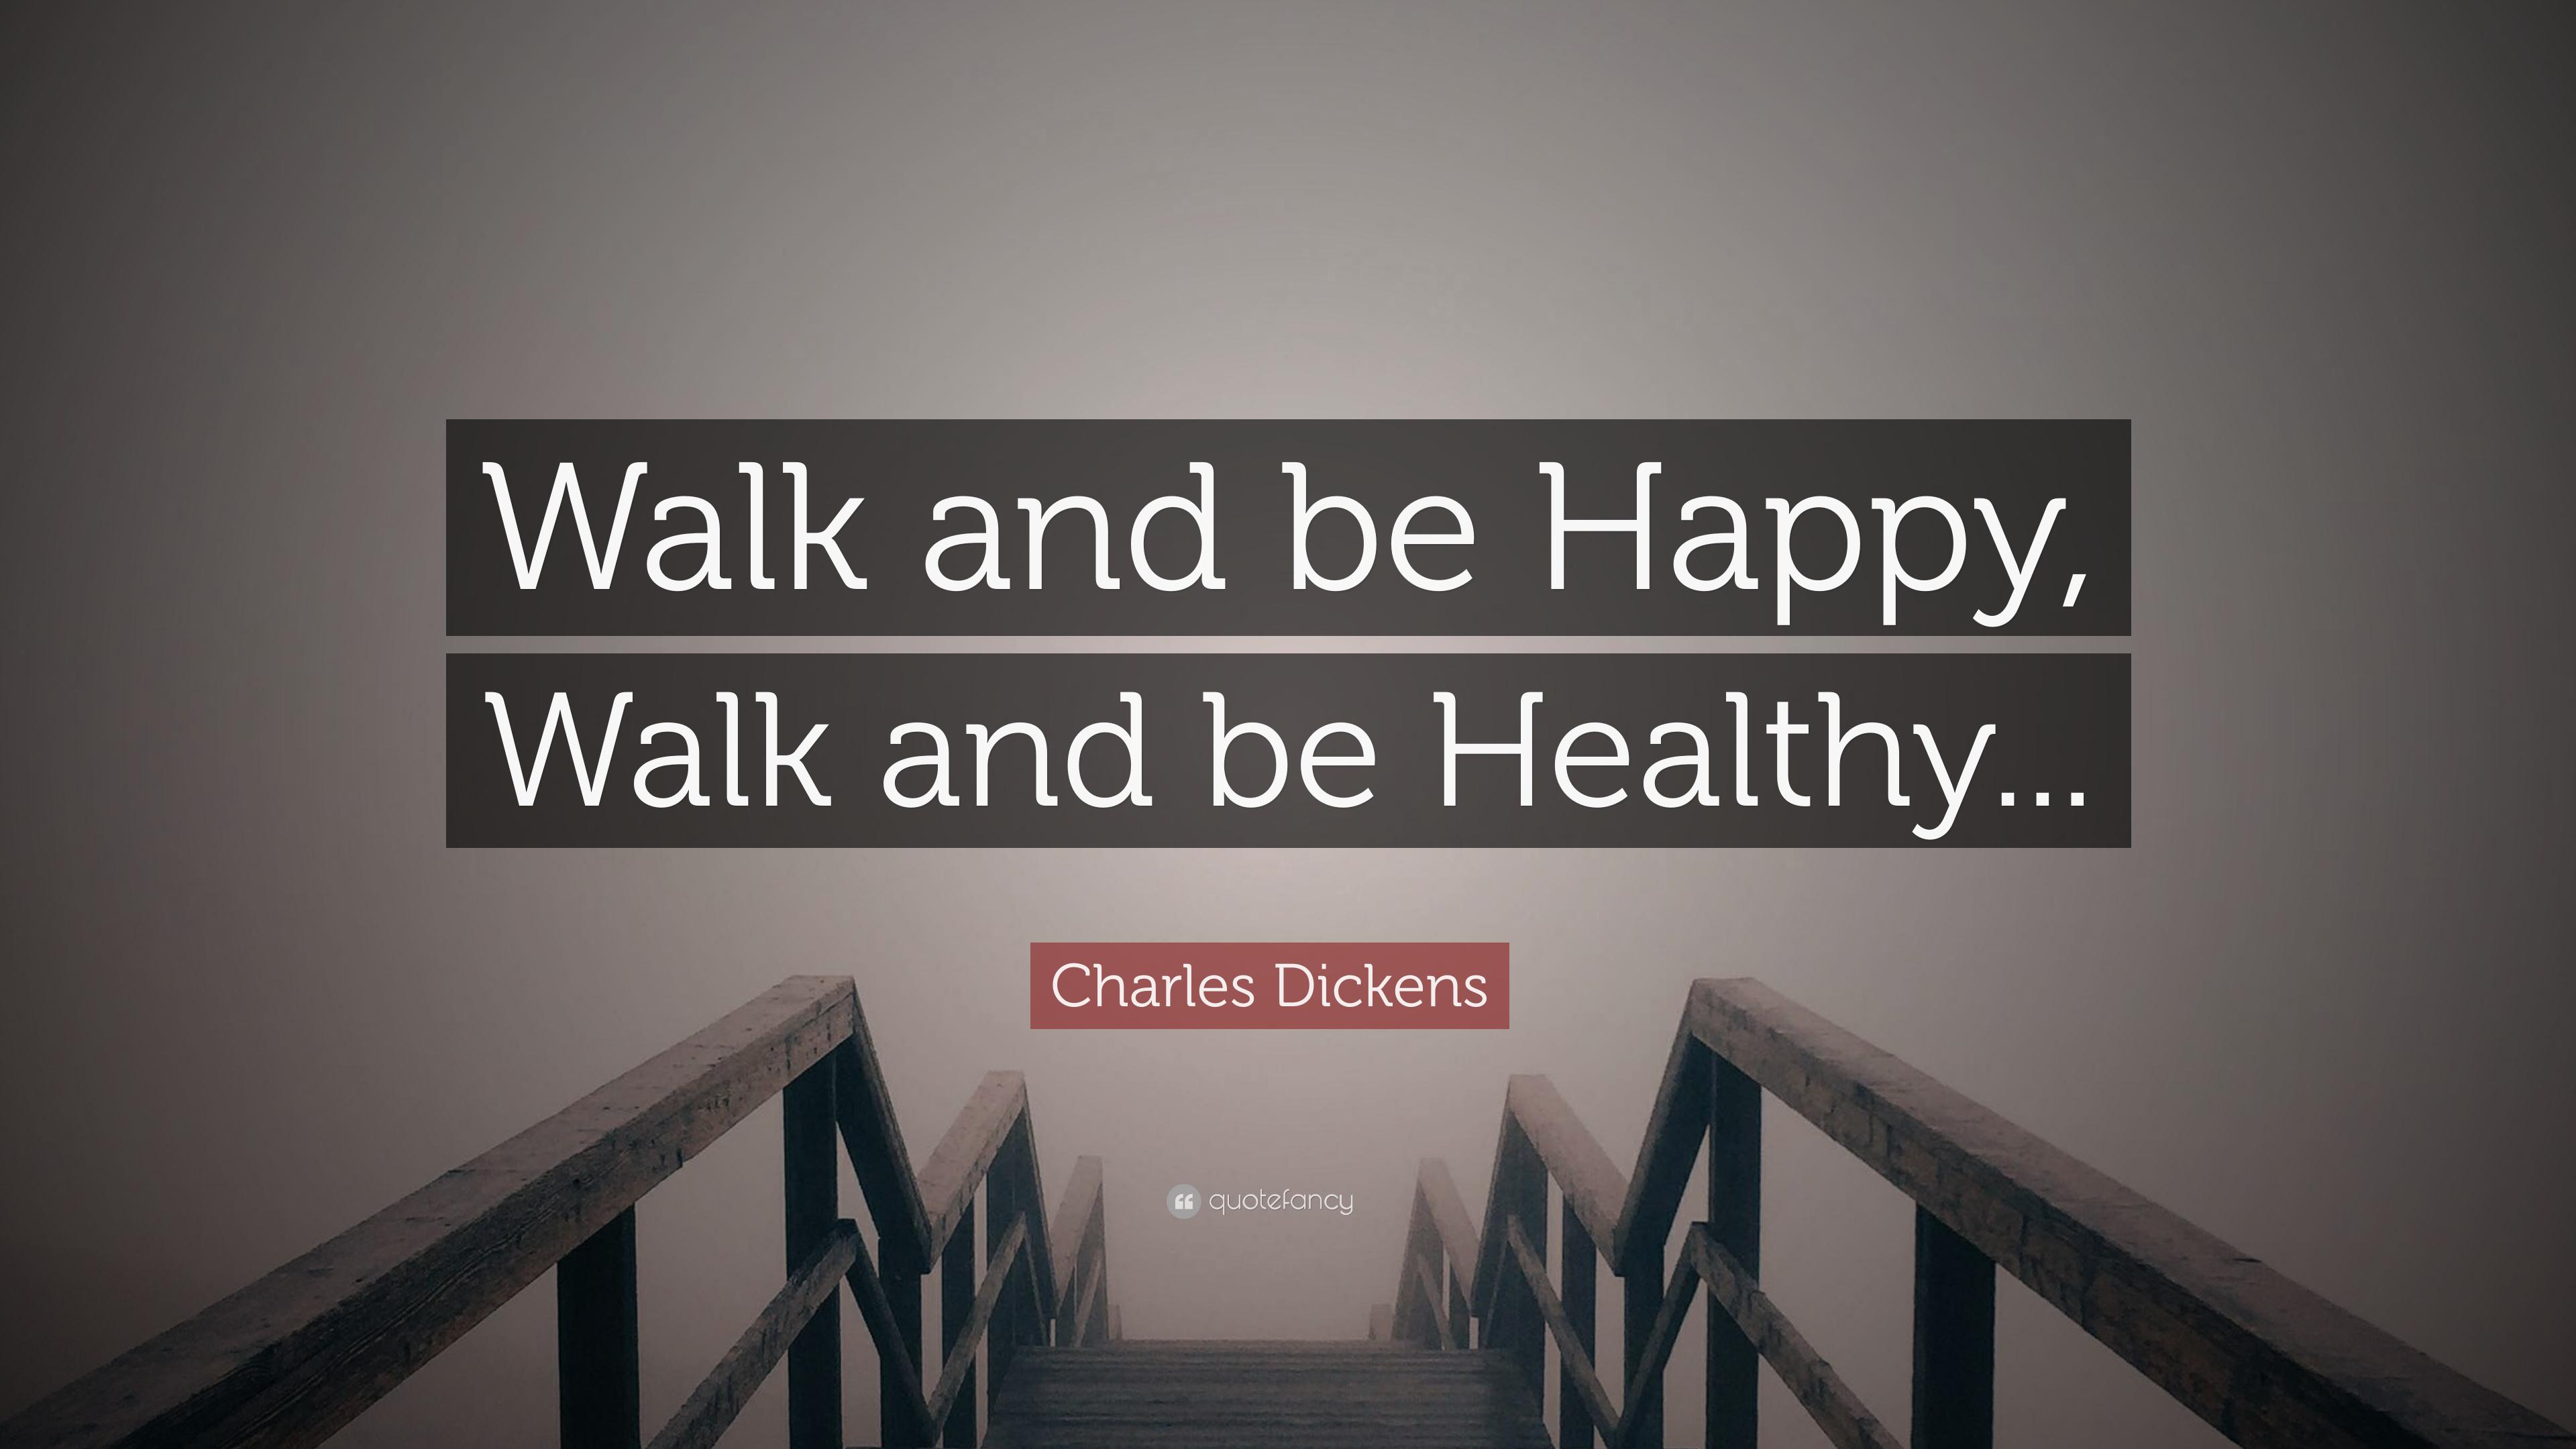 Charles Dickens Quote: “Walk and be Happy, Walk and be Healthy